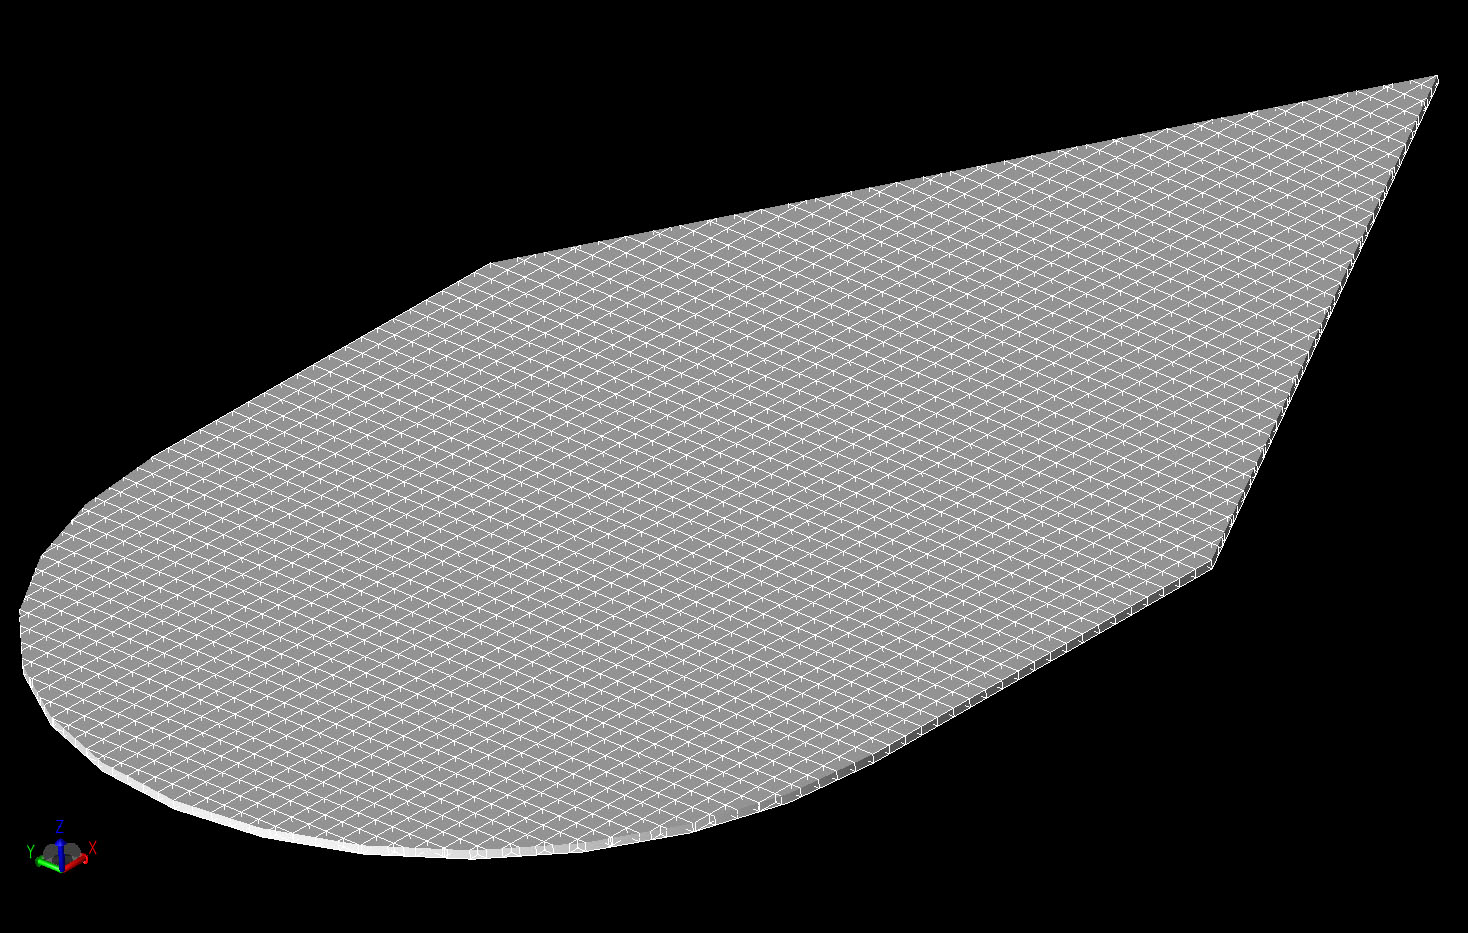 Figure 5A three dimensional view of the Wedge Plate Cylinder geometry mesh.